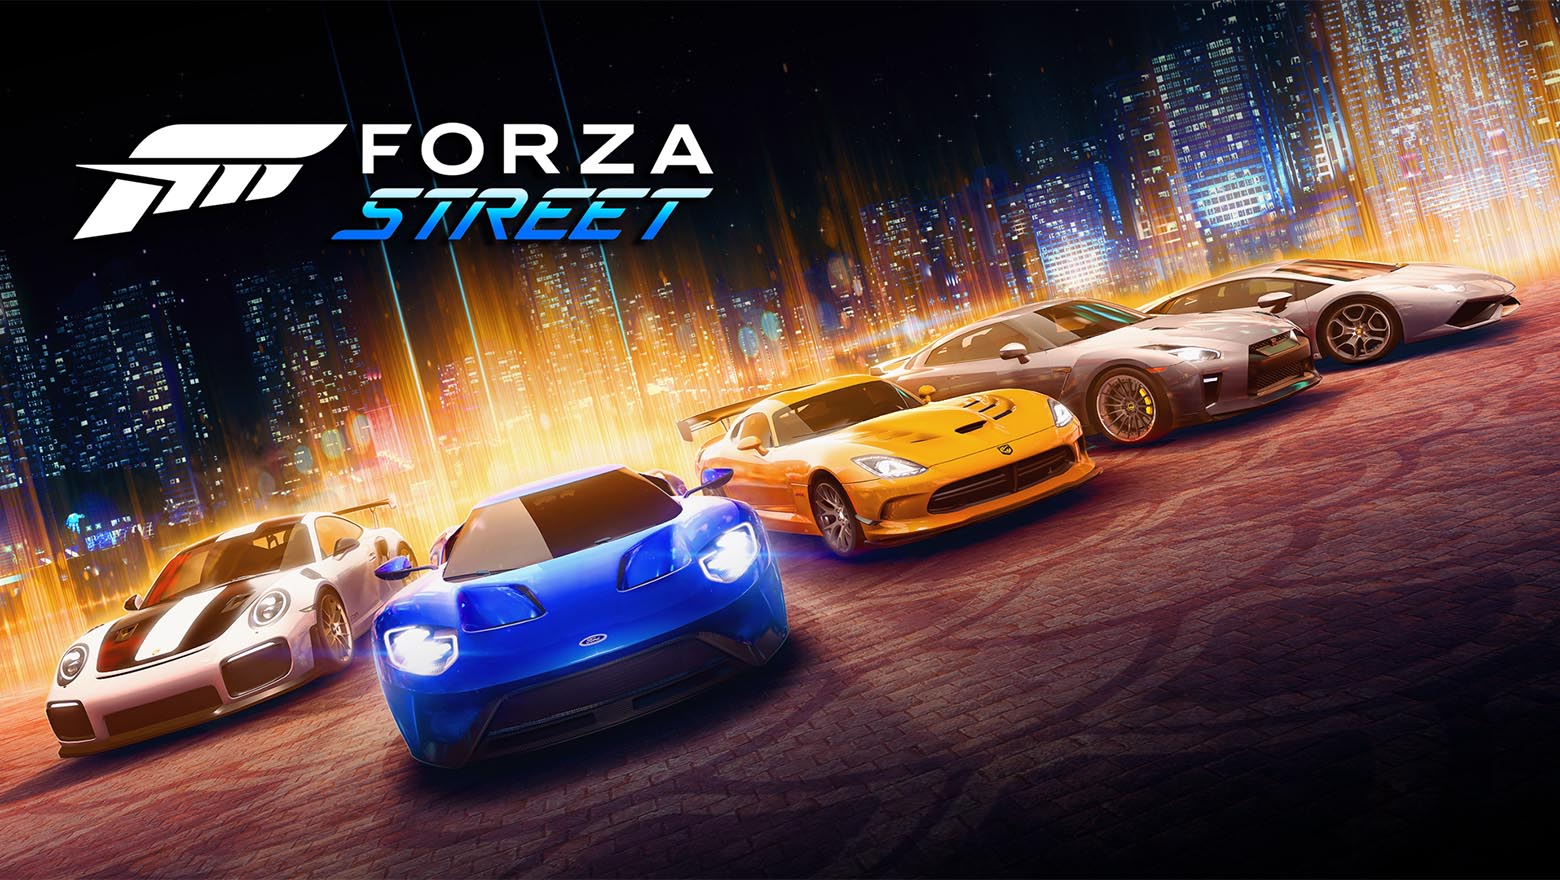 Now you can download Forza Street onto your mobile devices